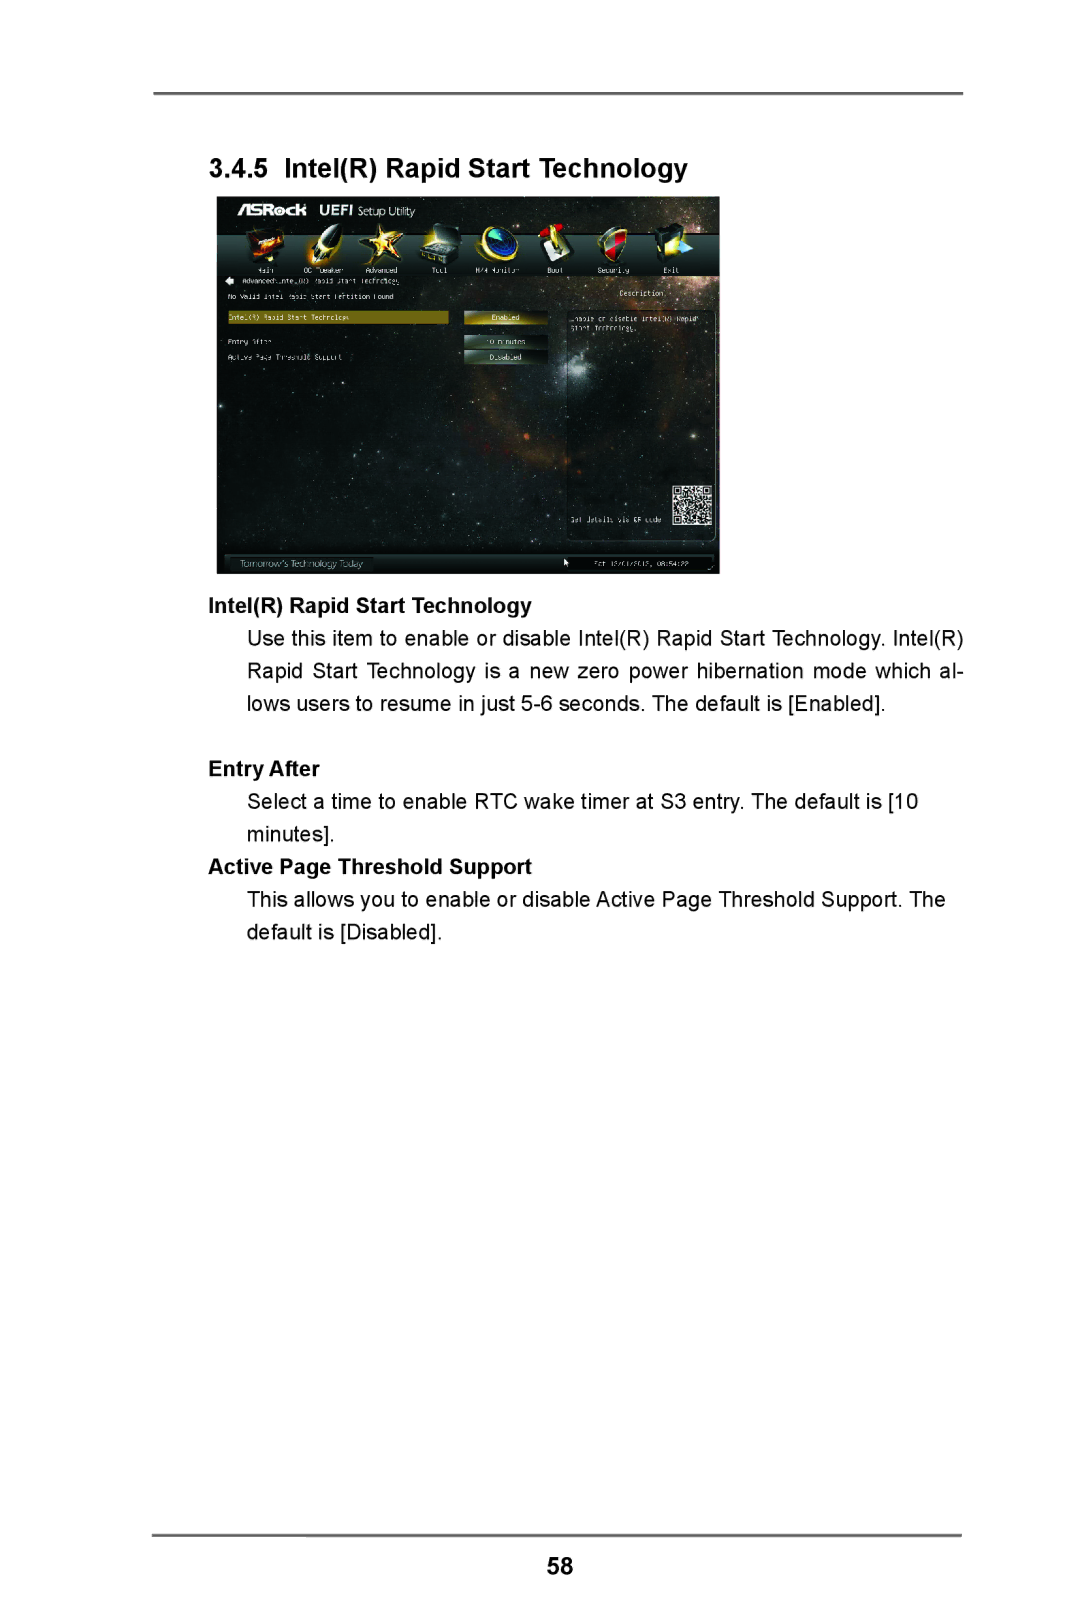 ASRock H61M-DP3 manual IntelR Rapid Start Technology, Entry After, Active Page Threshold Support 